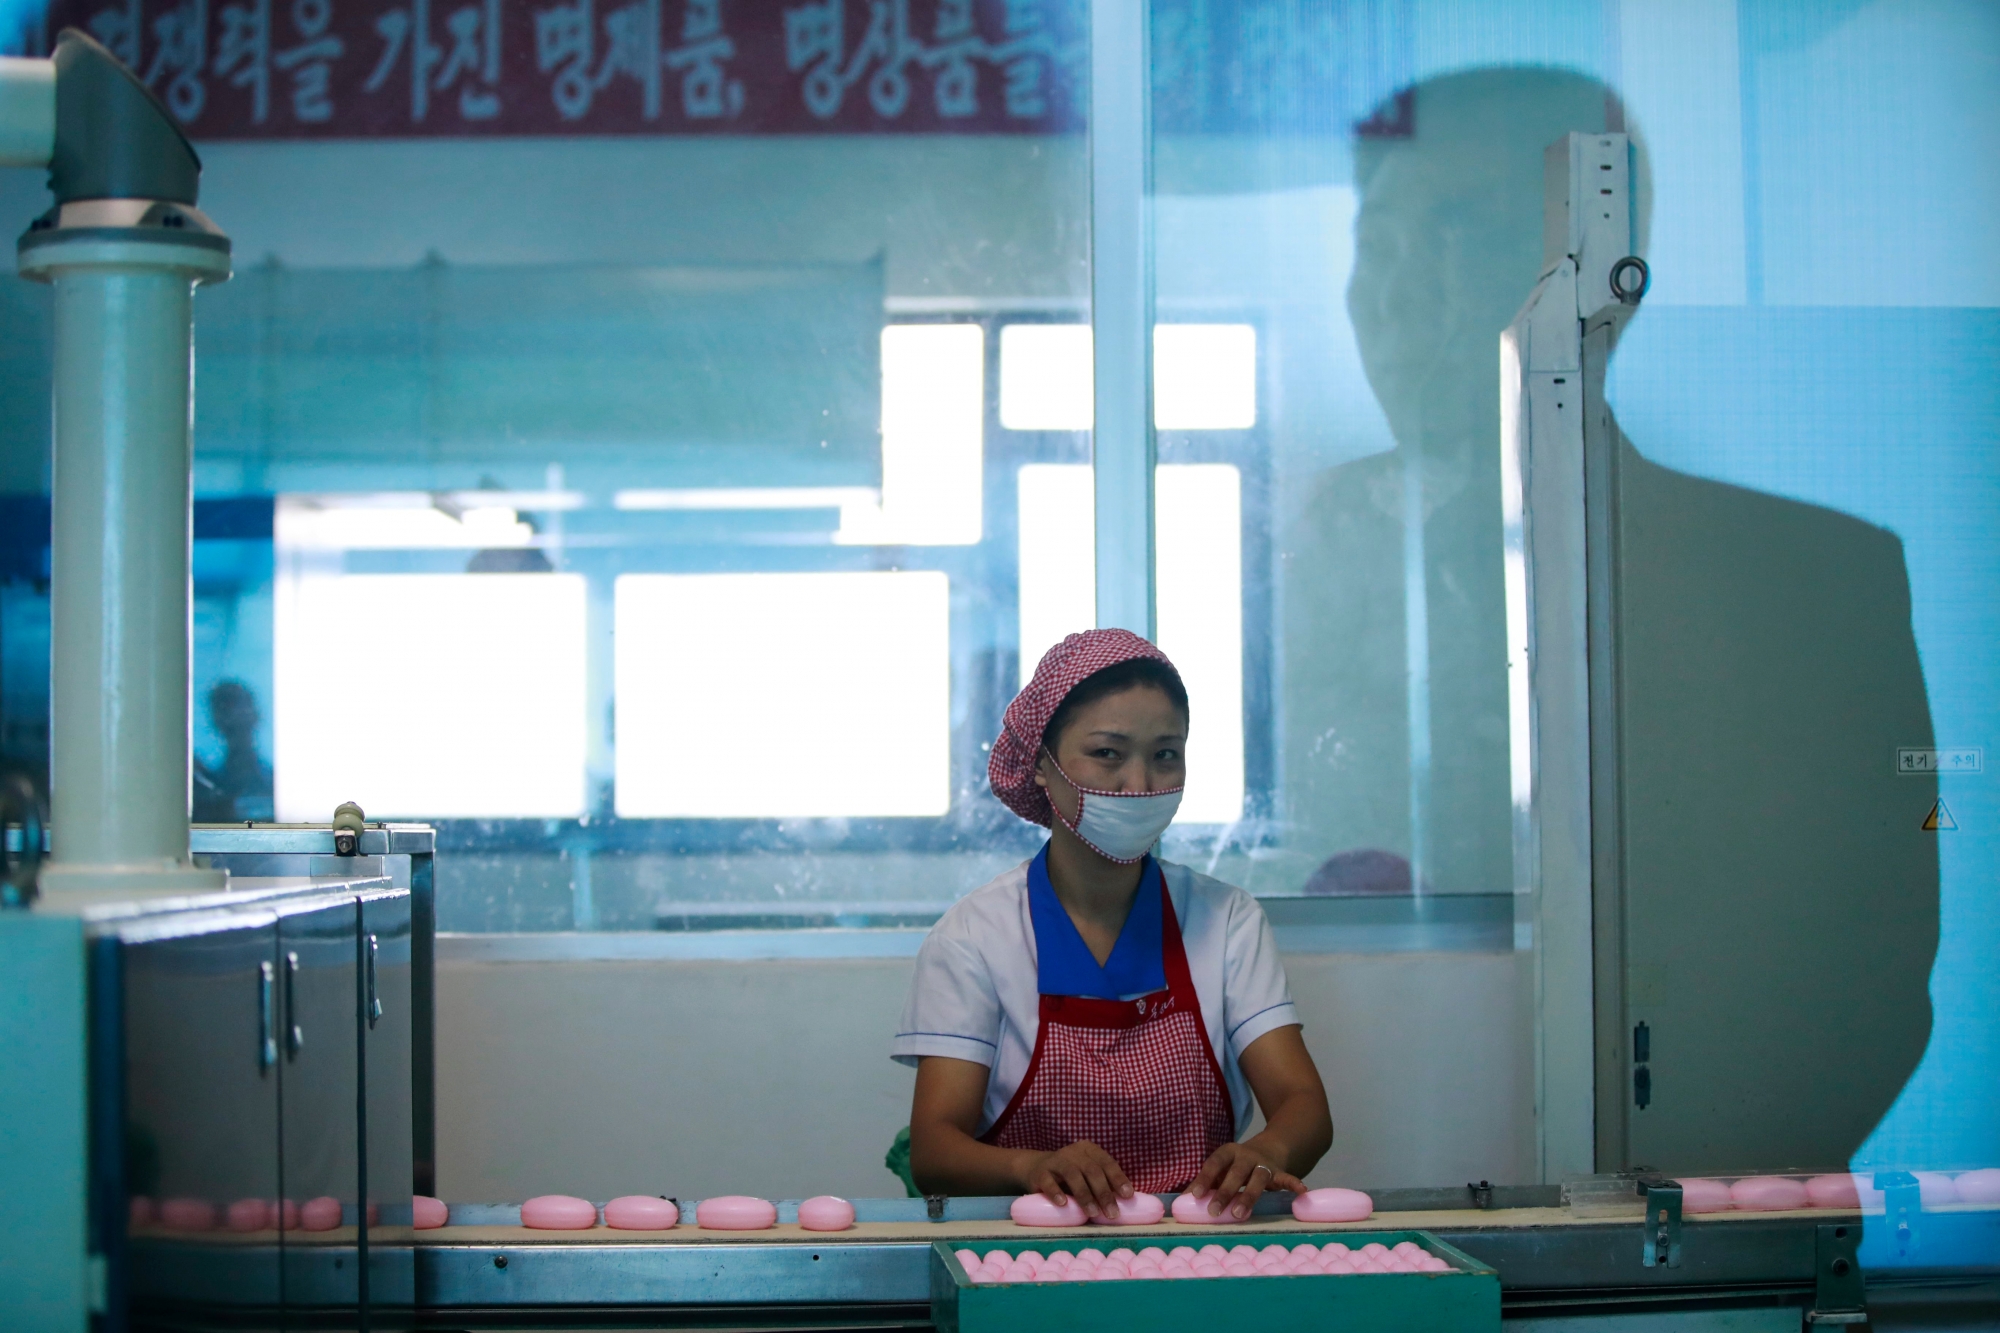 epa07134708 (FILE) - A North Korean man is reflected in a glass window as a female employee works on the production line for soap at the Pyongyang Cosmetics Factory during a tour for foreign media in Pyongyang, North Korea, 08 September 2018 (reissued 01 November 2018). According to a report by Human Rights Watch on 01 November, women in North Korea are subjected to widespread sexual abuse by officials. The report is based on interviews conducted with refugees from the reclusive country, detailing accounts of reape and sexual abuse that have become 'normal' and an accepted part of life to oridnary women.  EPA/HOW HWEE YOUNG (FILE) NORTH KOREA SEXUAL ABUSE